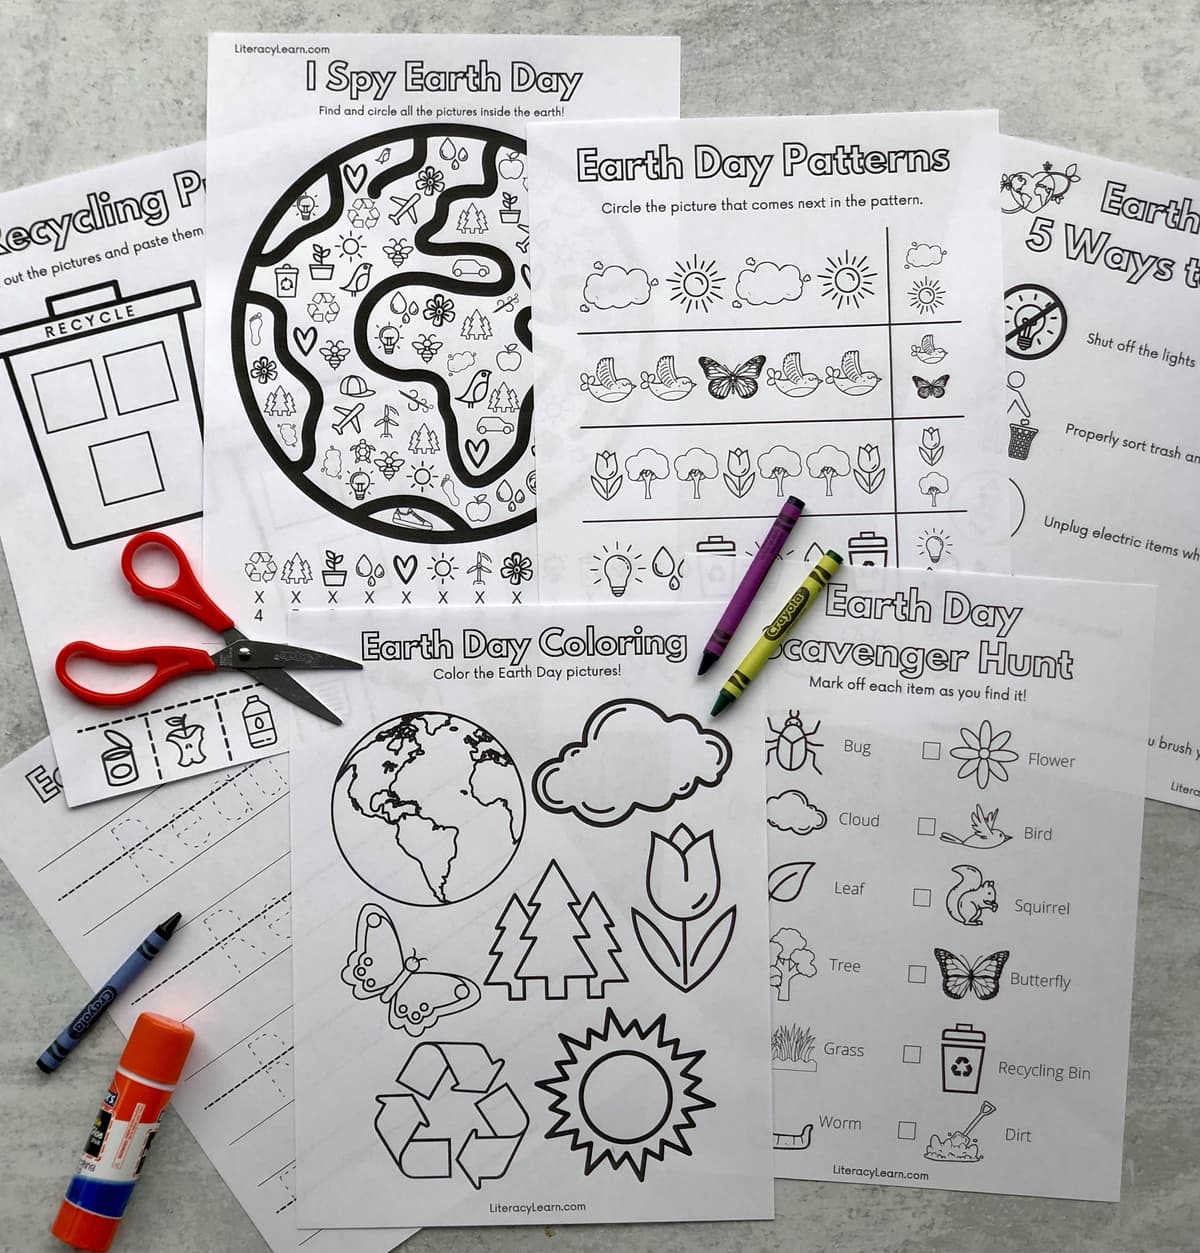 The printed earth day worksheets with crayons, scissor, and glue stick. 